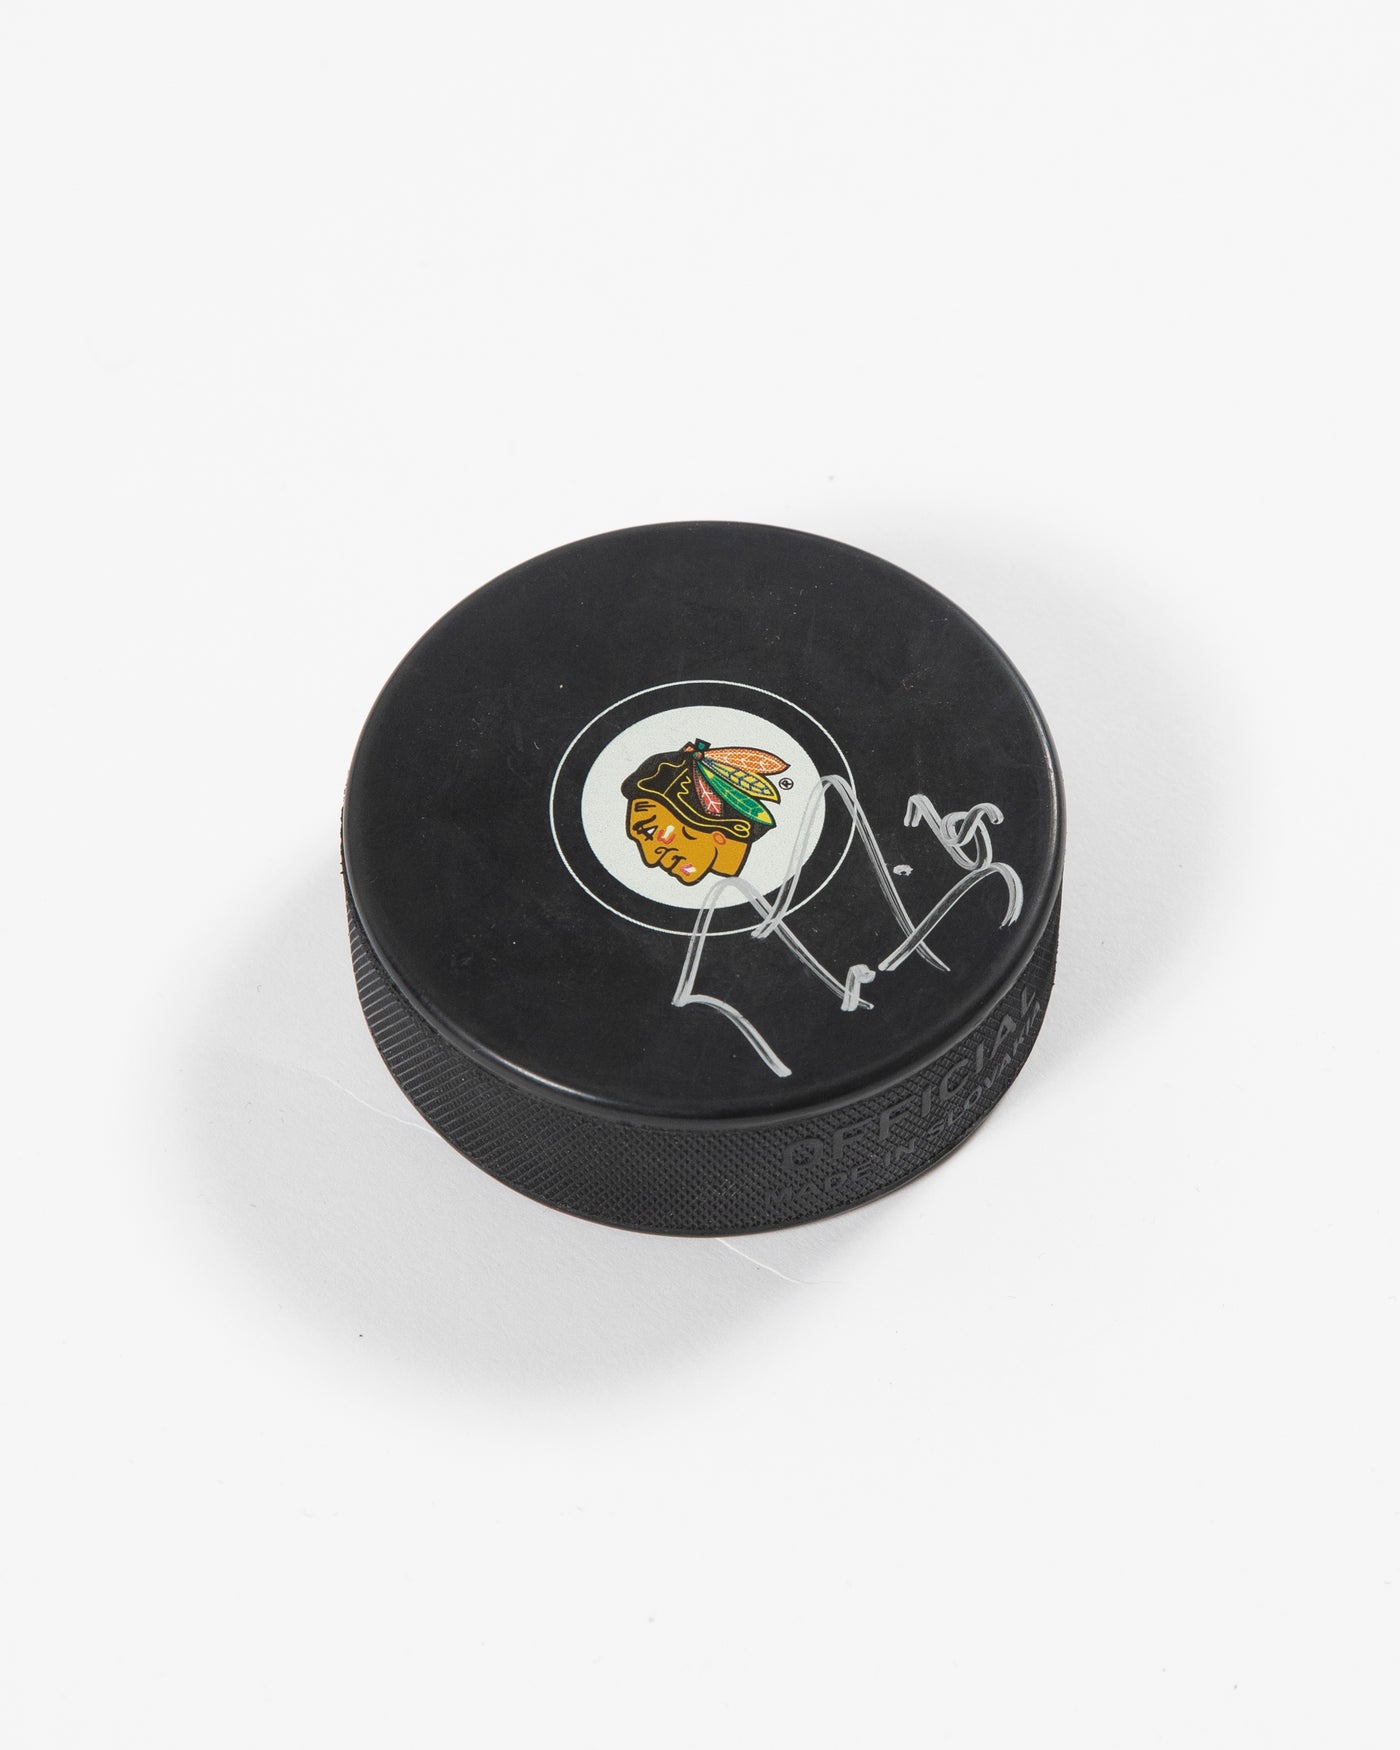 Signed Chicago Blackhawks Marc-André Fleury hockey puck - side angle